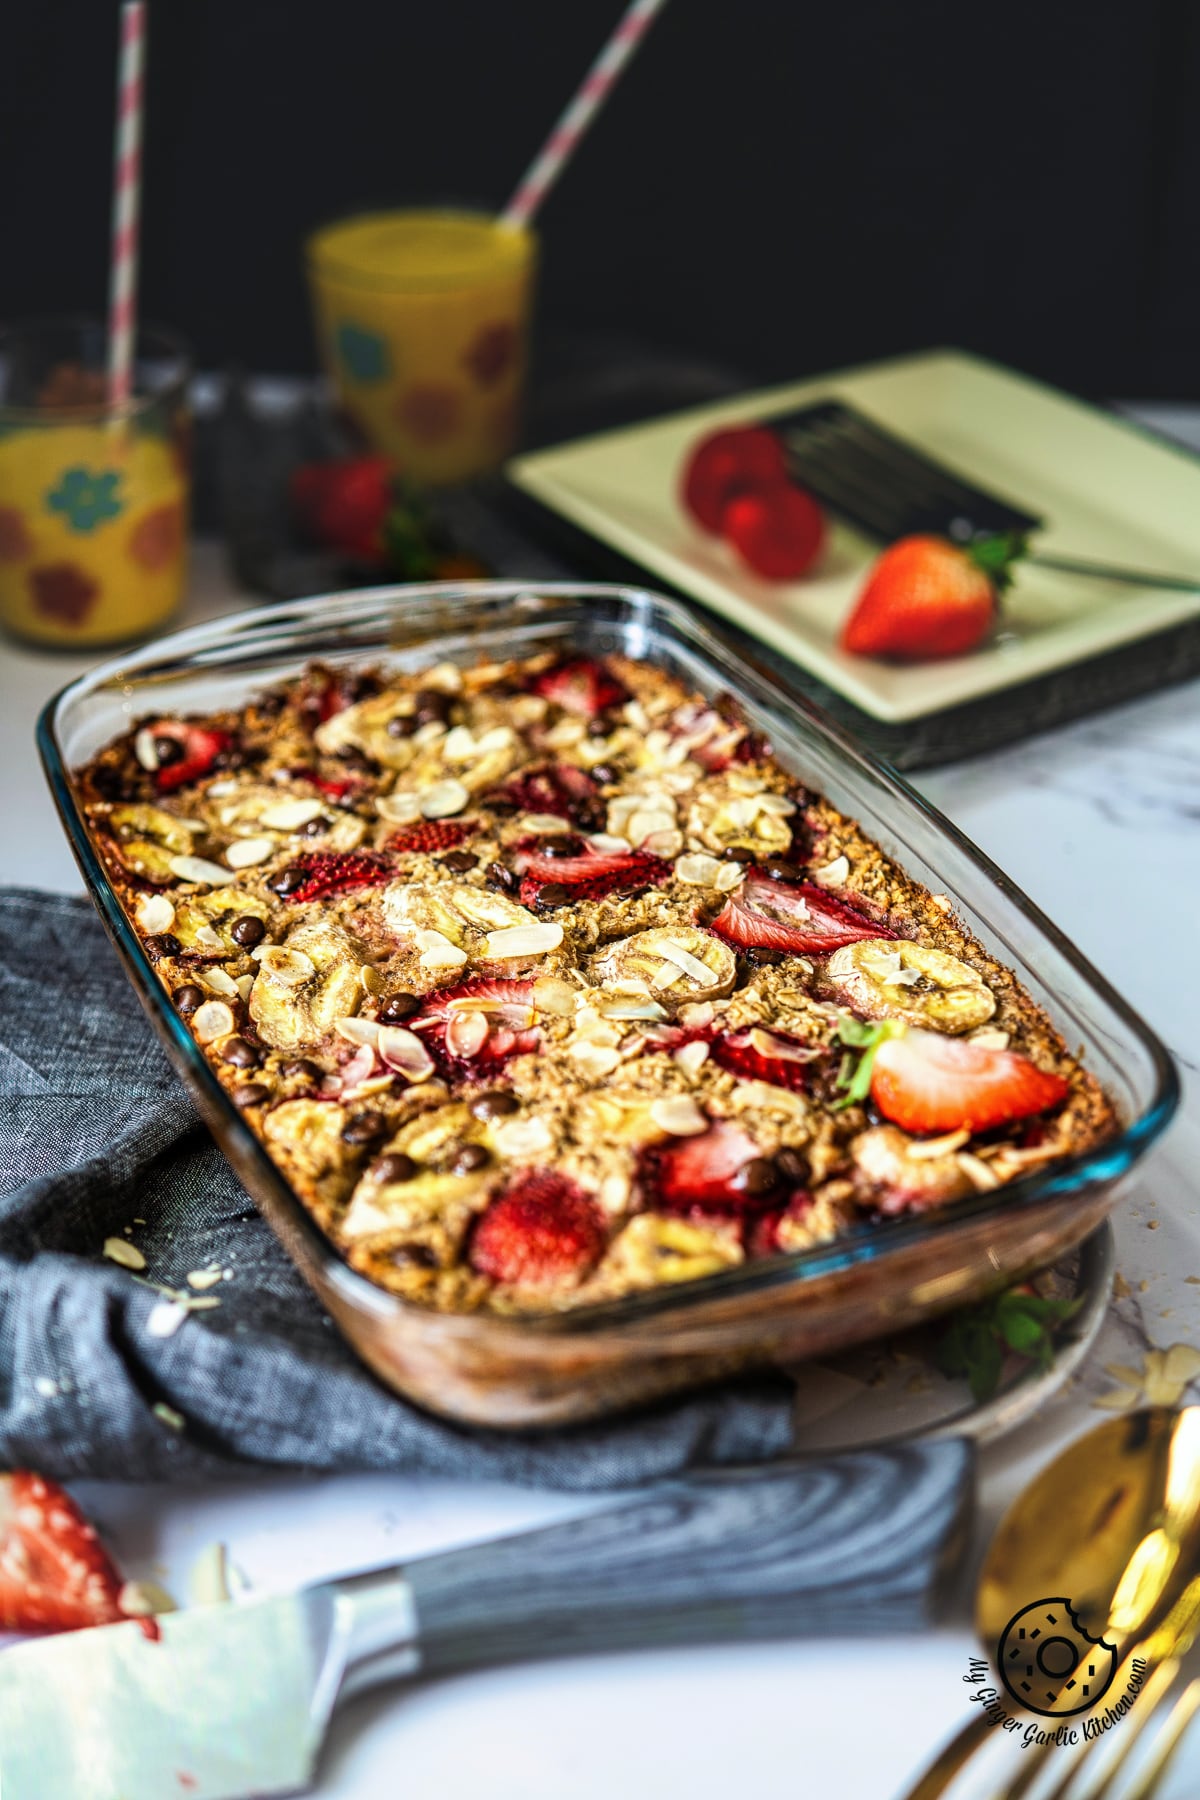 photo of a glass baking dish with a strawberry baked oatmeal topped with strawberries and bananas